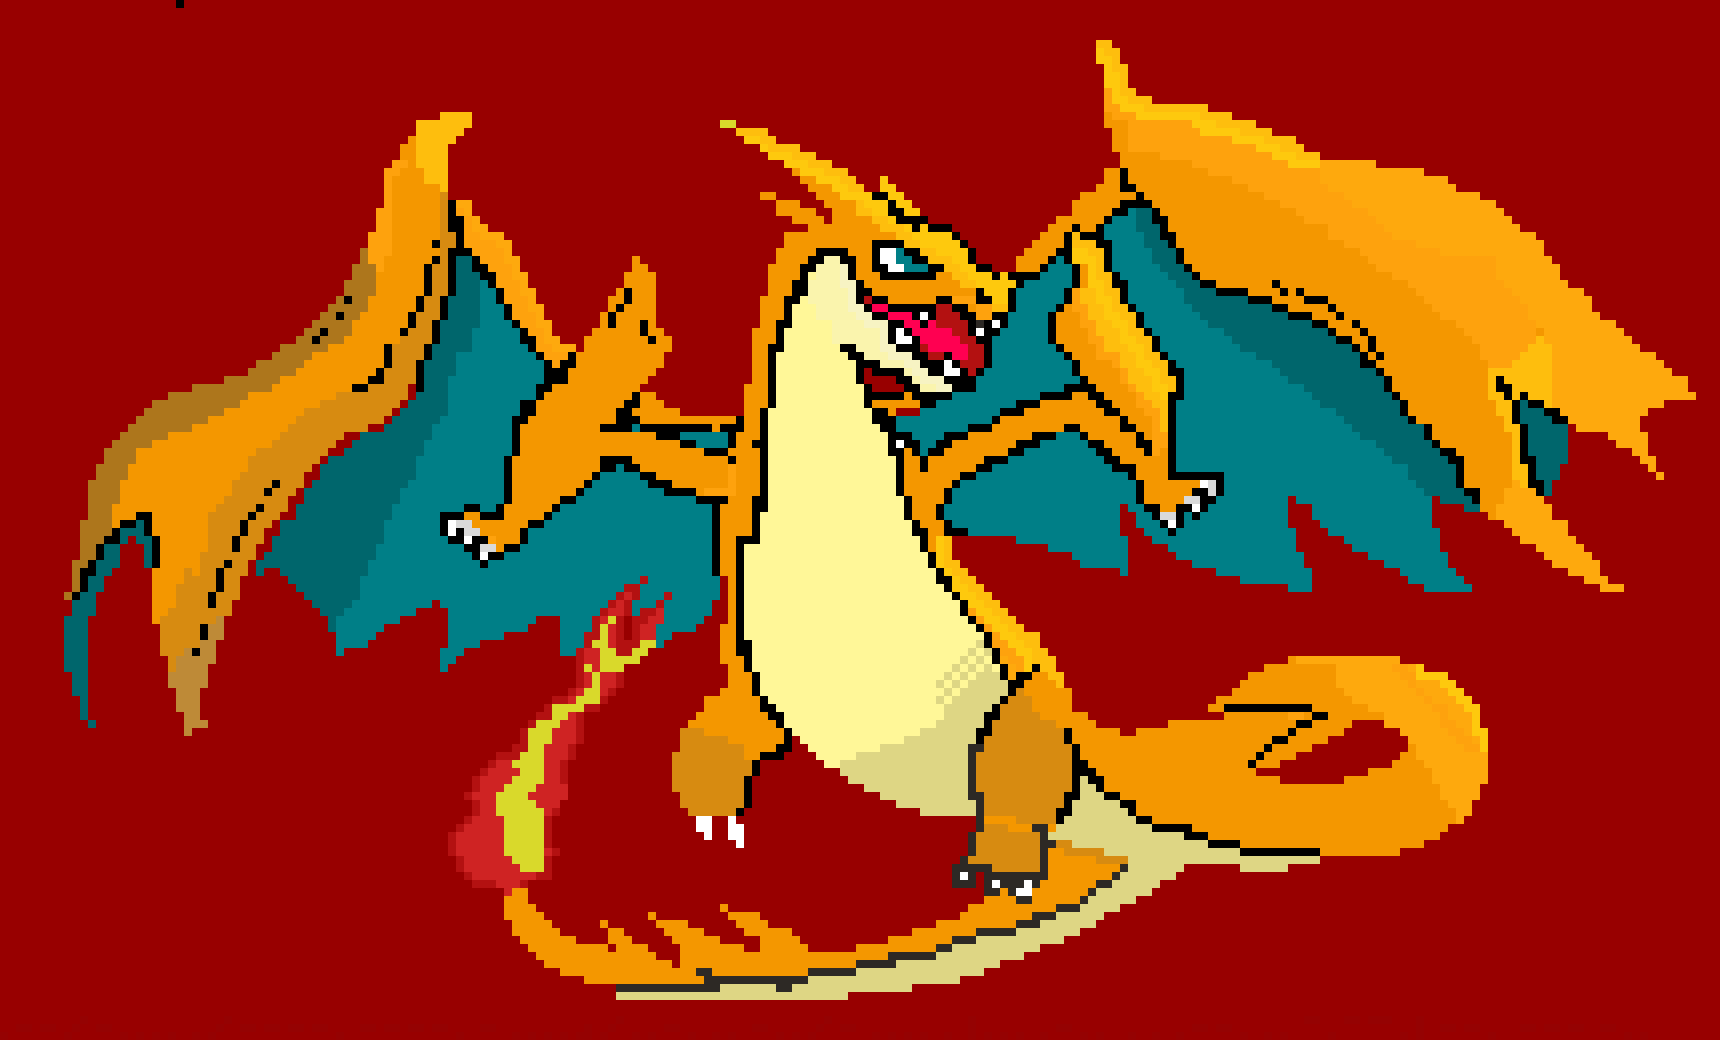 mega-charizard-y-my-final-pixel-art-for-the-year-and-a-goodbye-in-comments